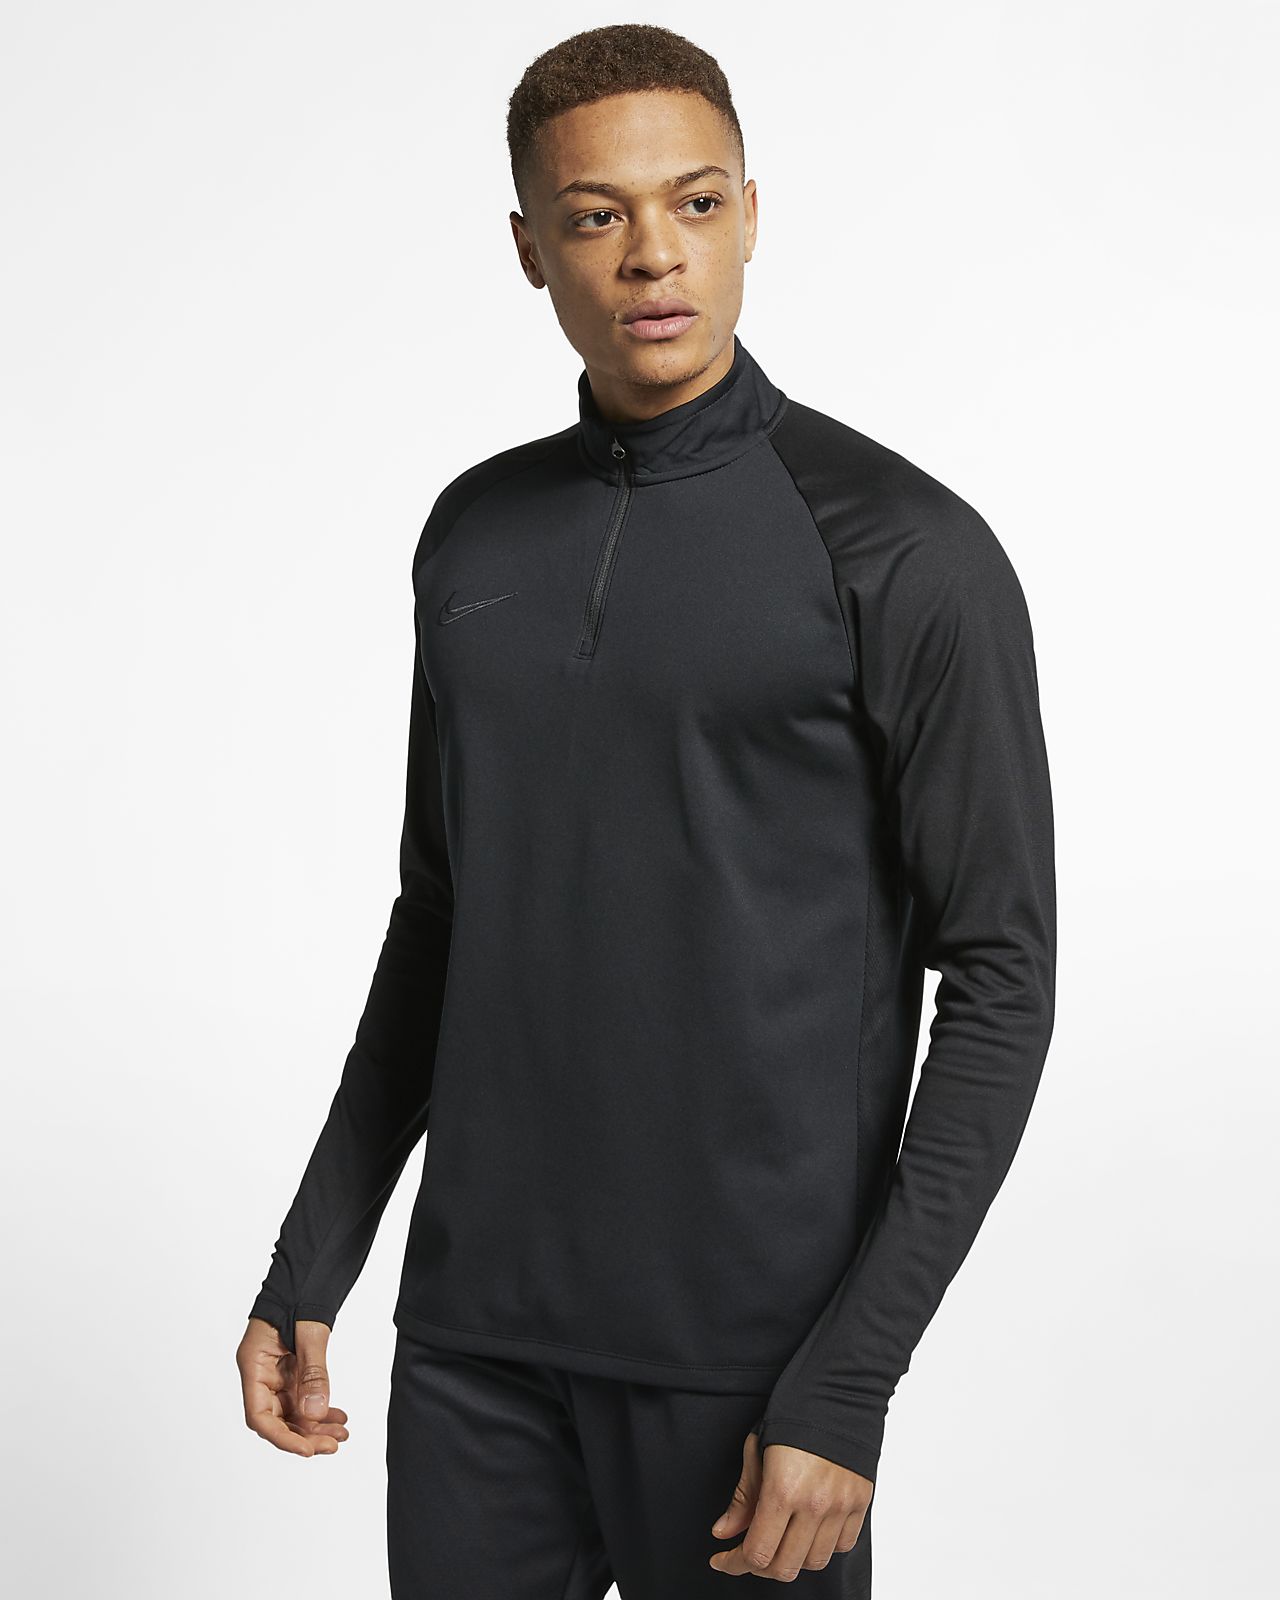 academy winter mid layer drill top mens